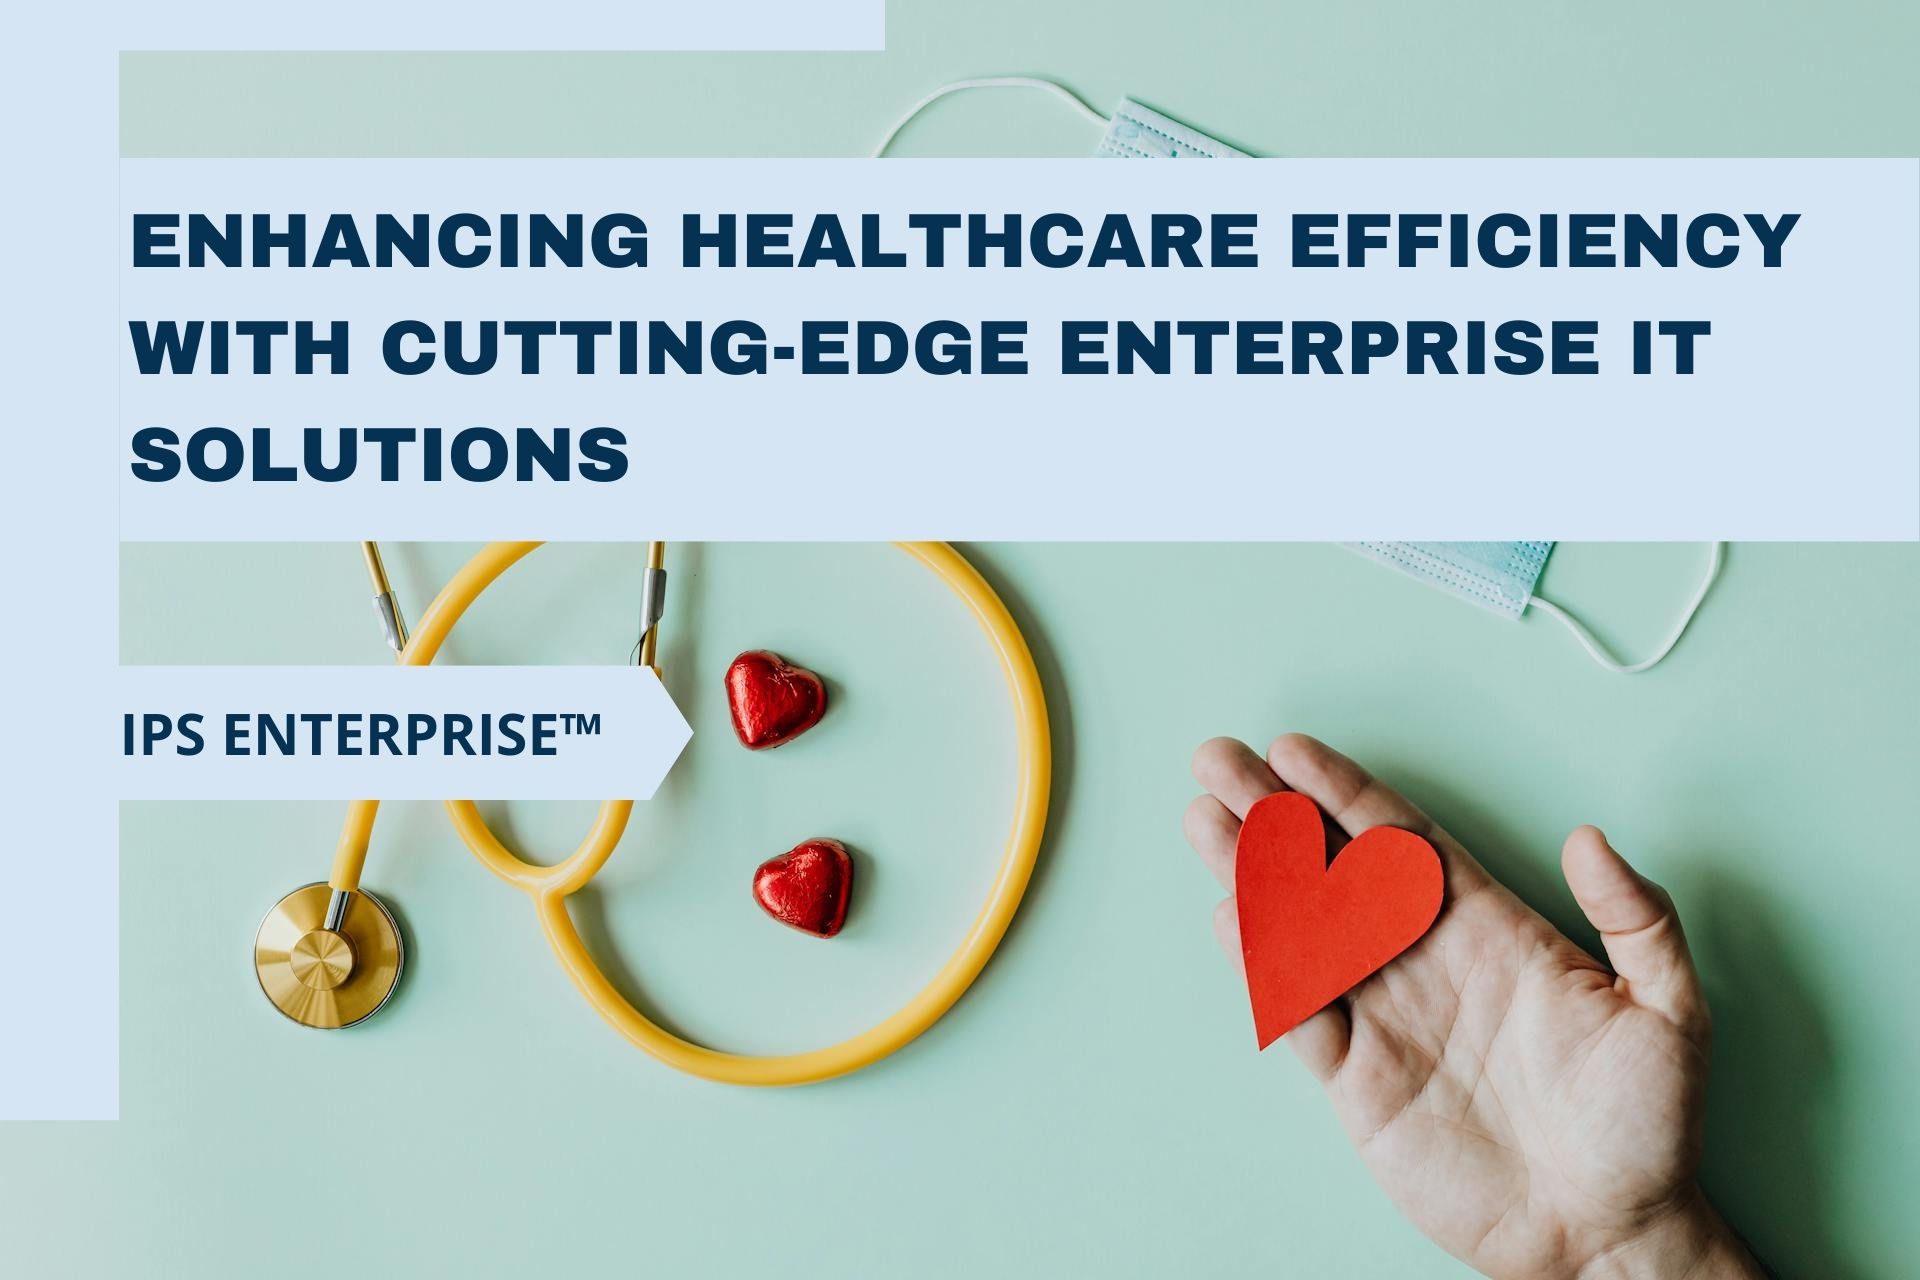 Enhancing Healthcare Efficiency with Cutting-Edge Enterprise IT Solutions